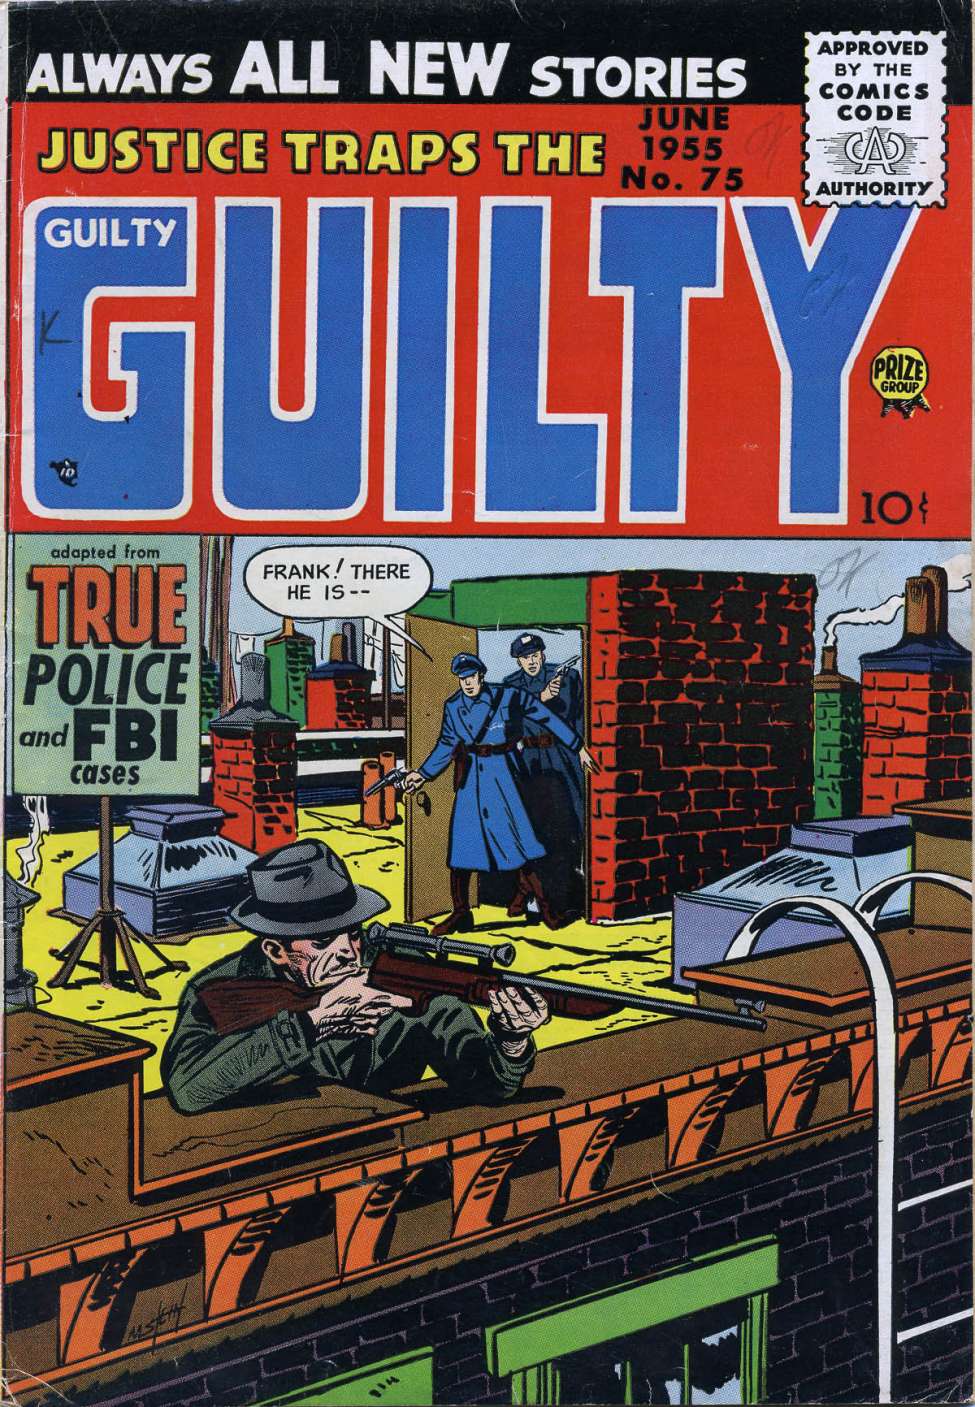 Book Cover For Justice Traps the Guilty 75